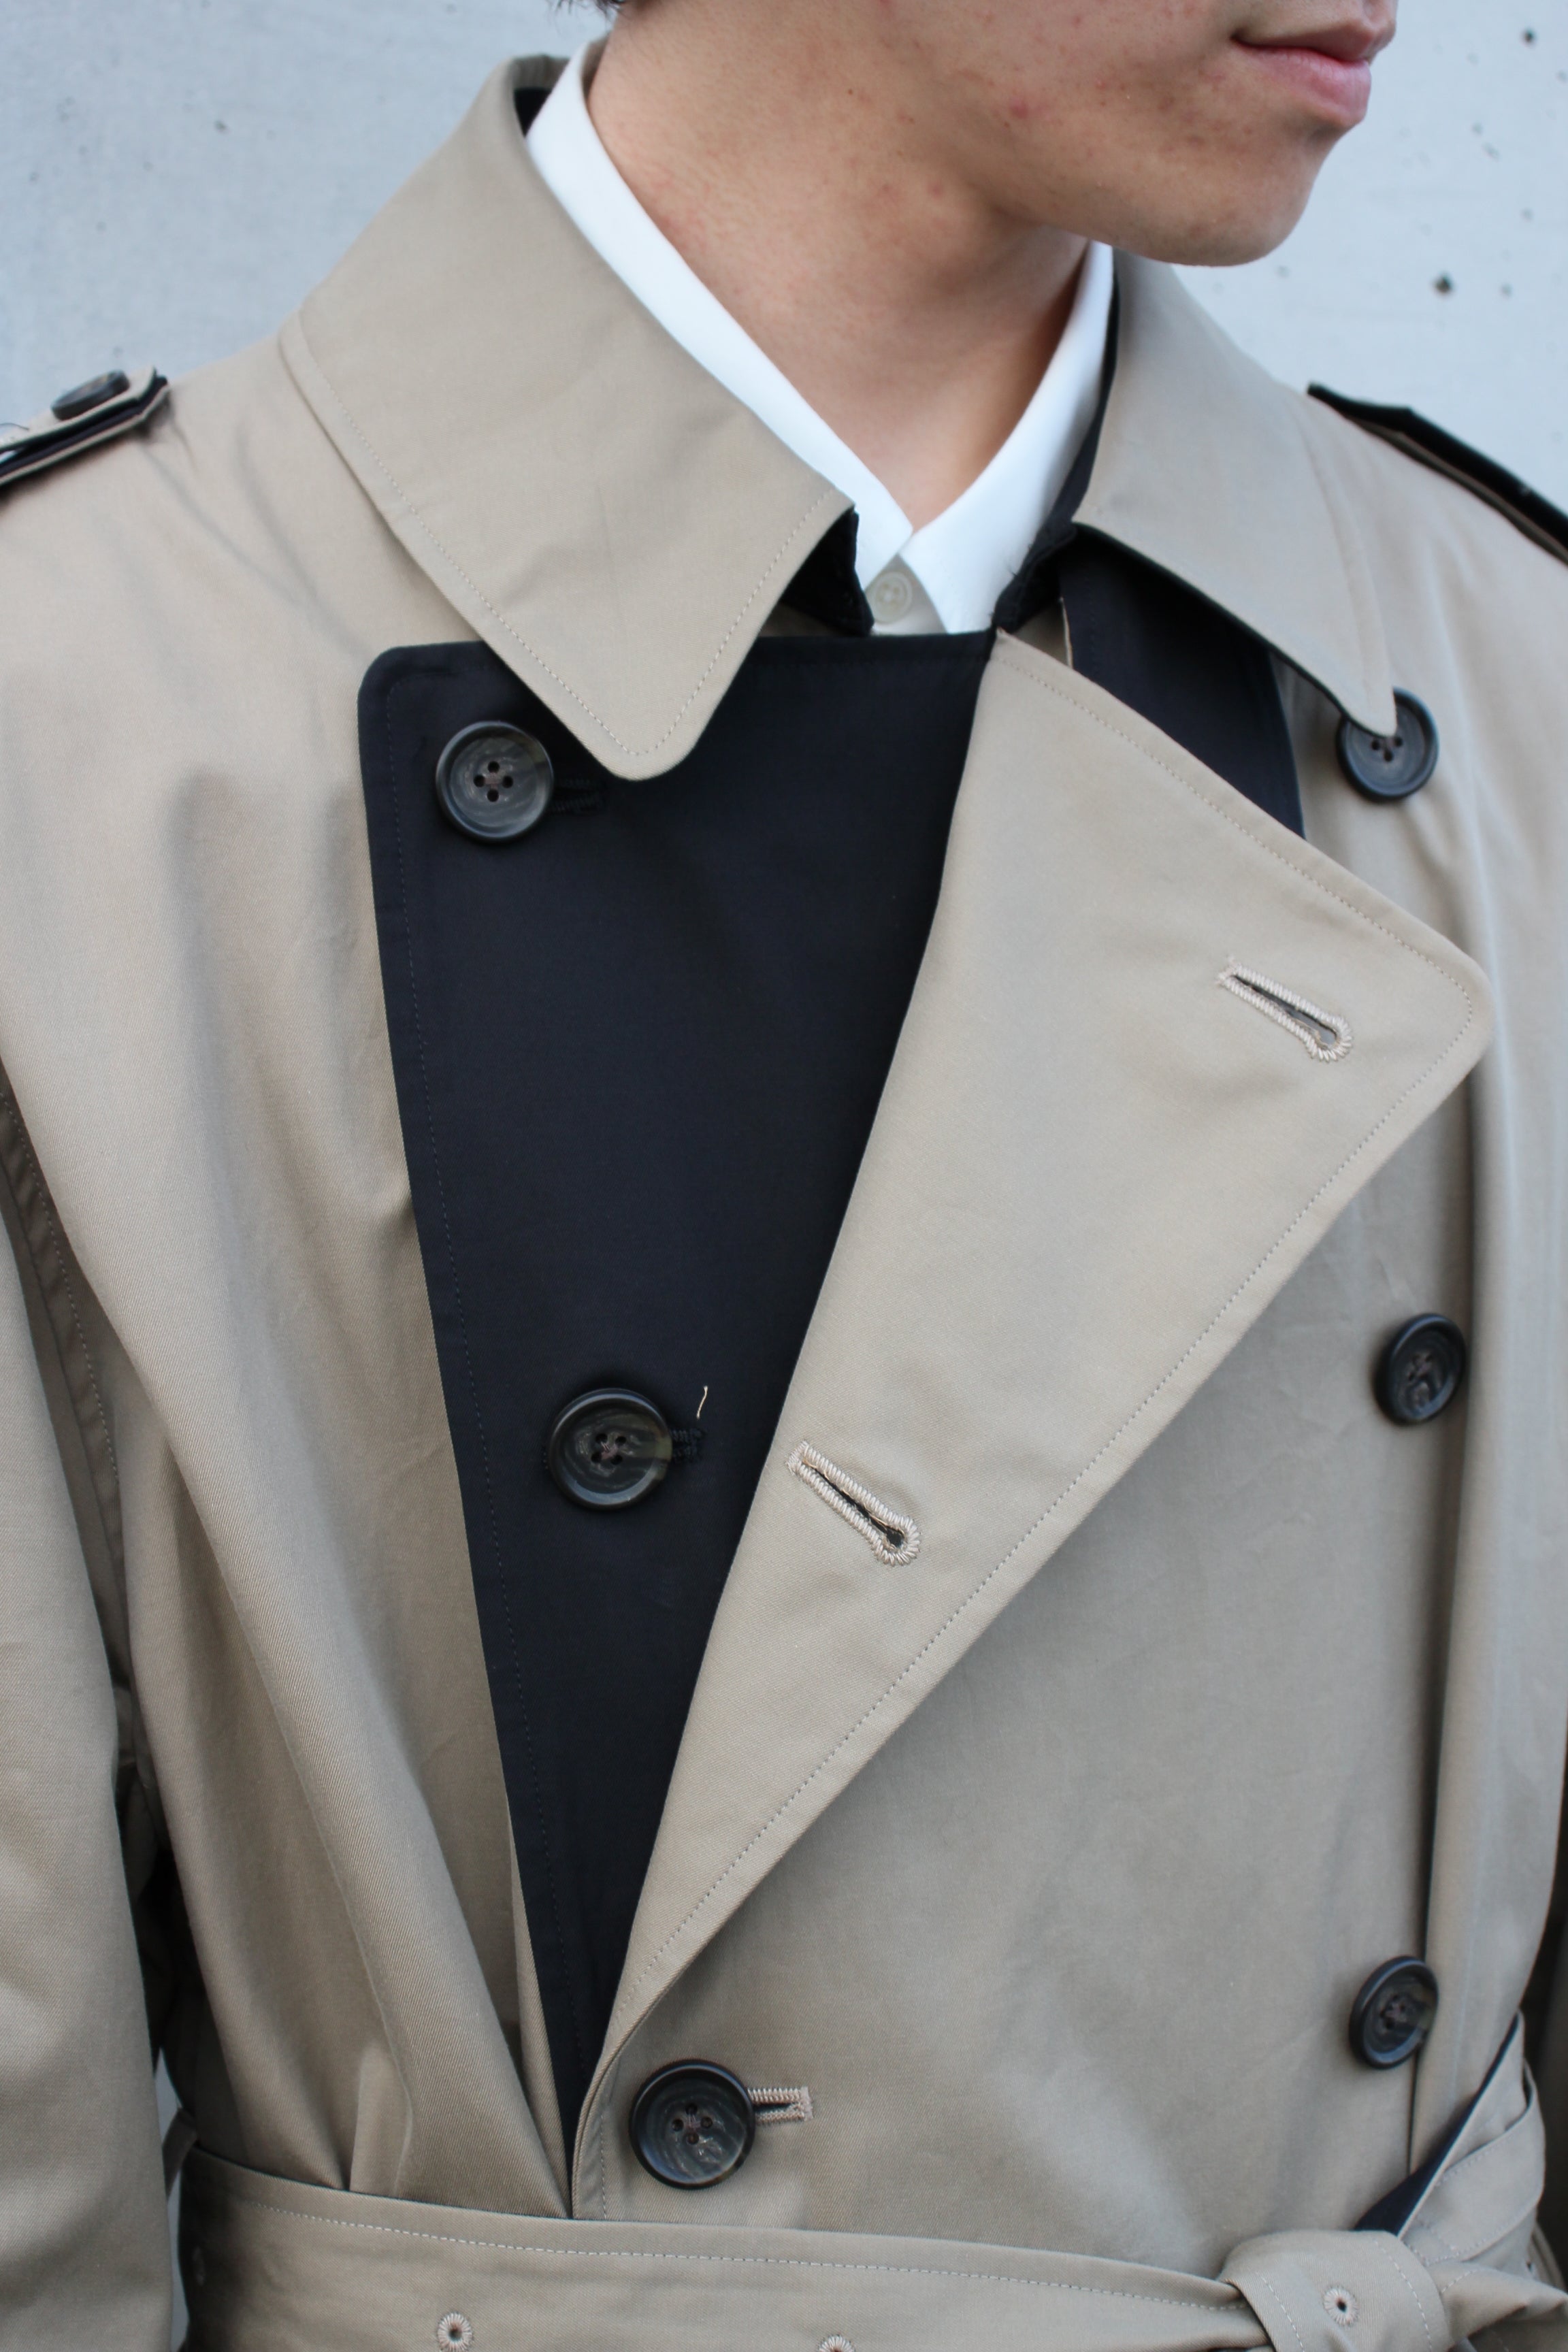 OVERSIZED DOUBLE LAPELED TRENCH COAT – TIME AFTER TIME